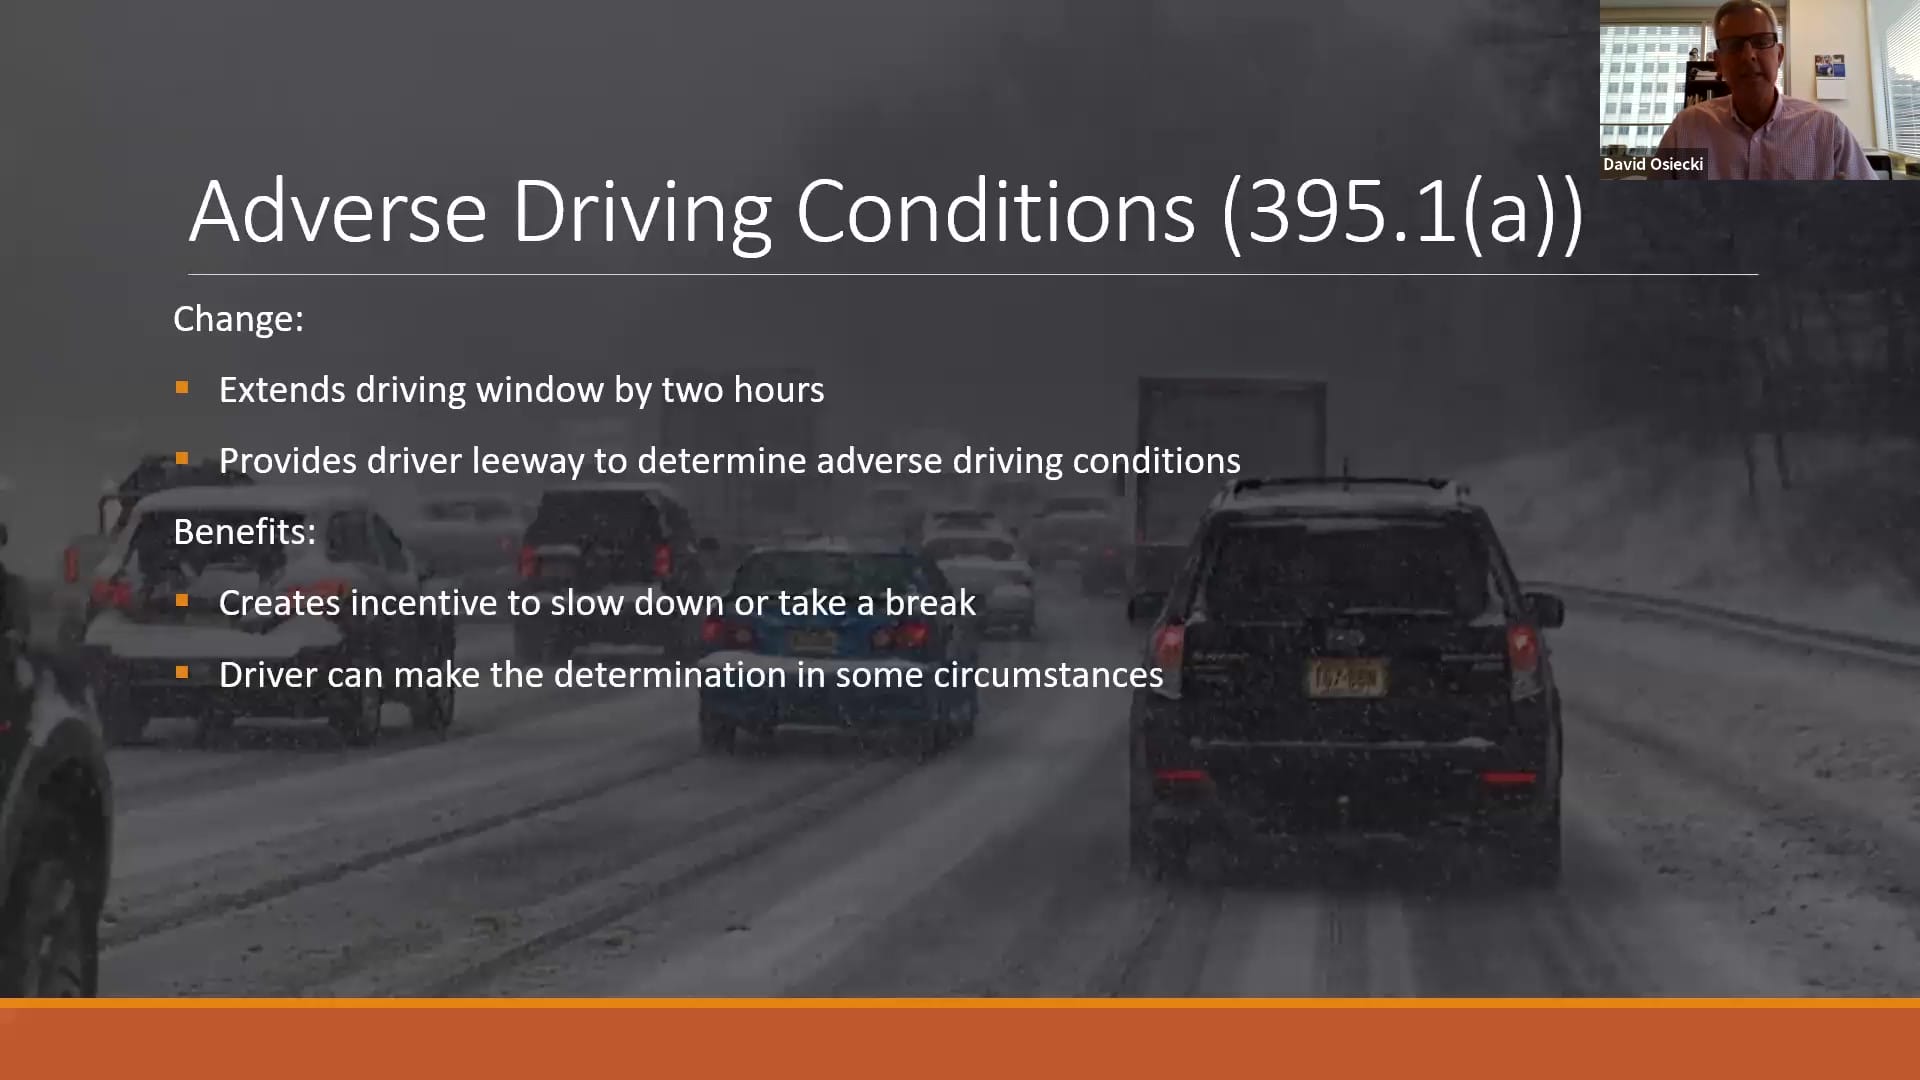 FMCSA Hours of Service Adverse Driving Conditions 395.1 (a)